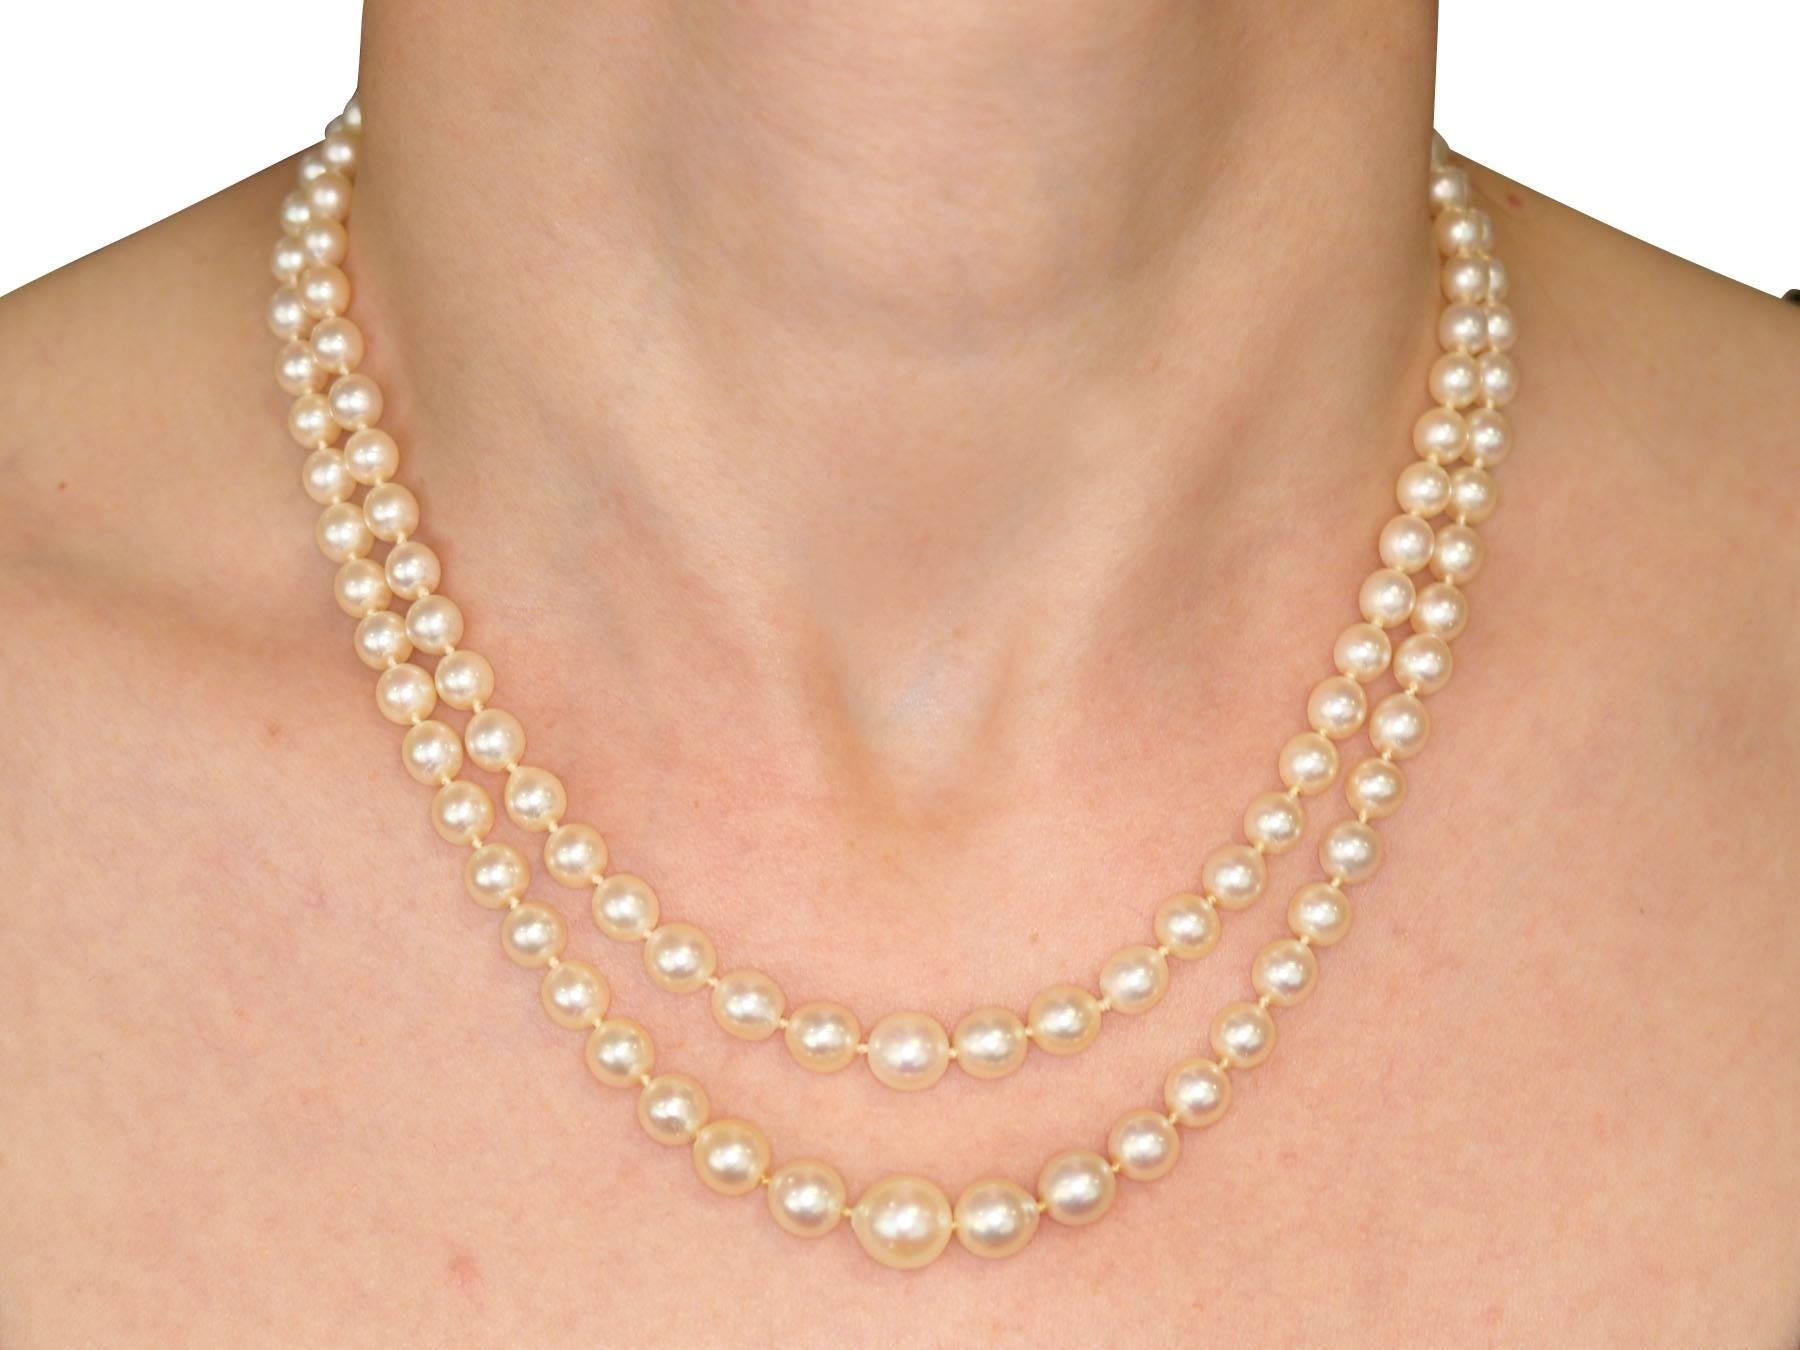 Women's or Men's Art Deco Style Double Strand Pearl Necklace with White Gold and Diamond Clasp